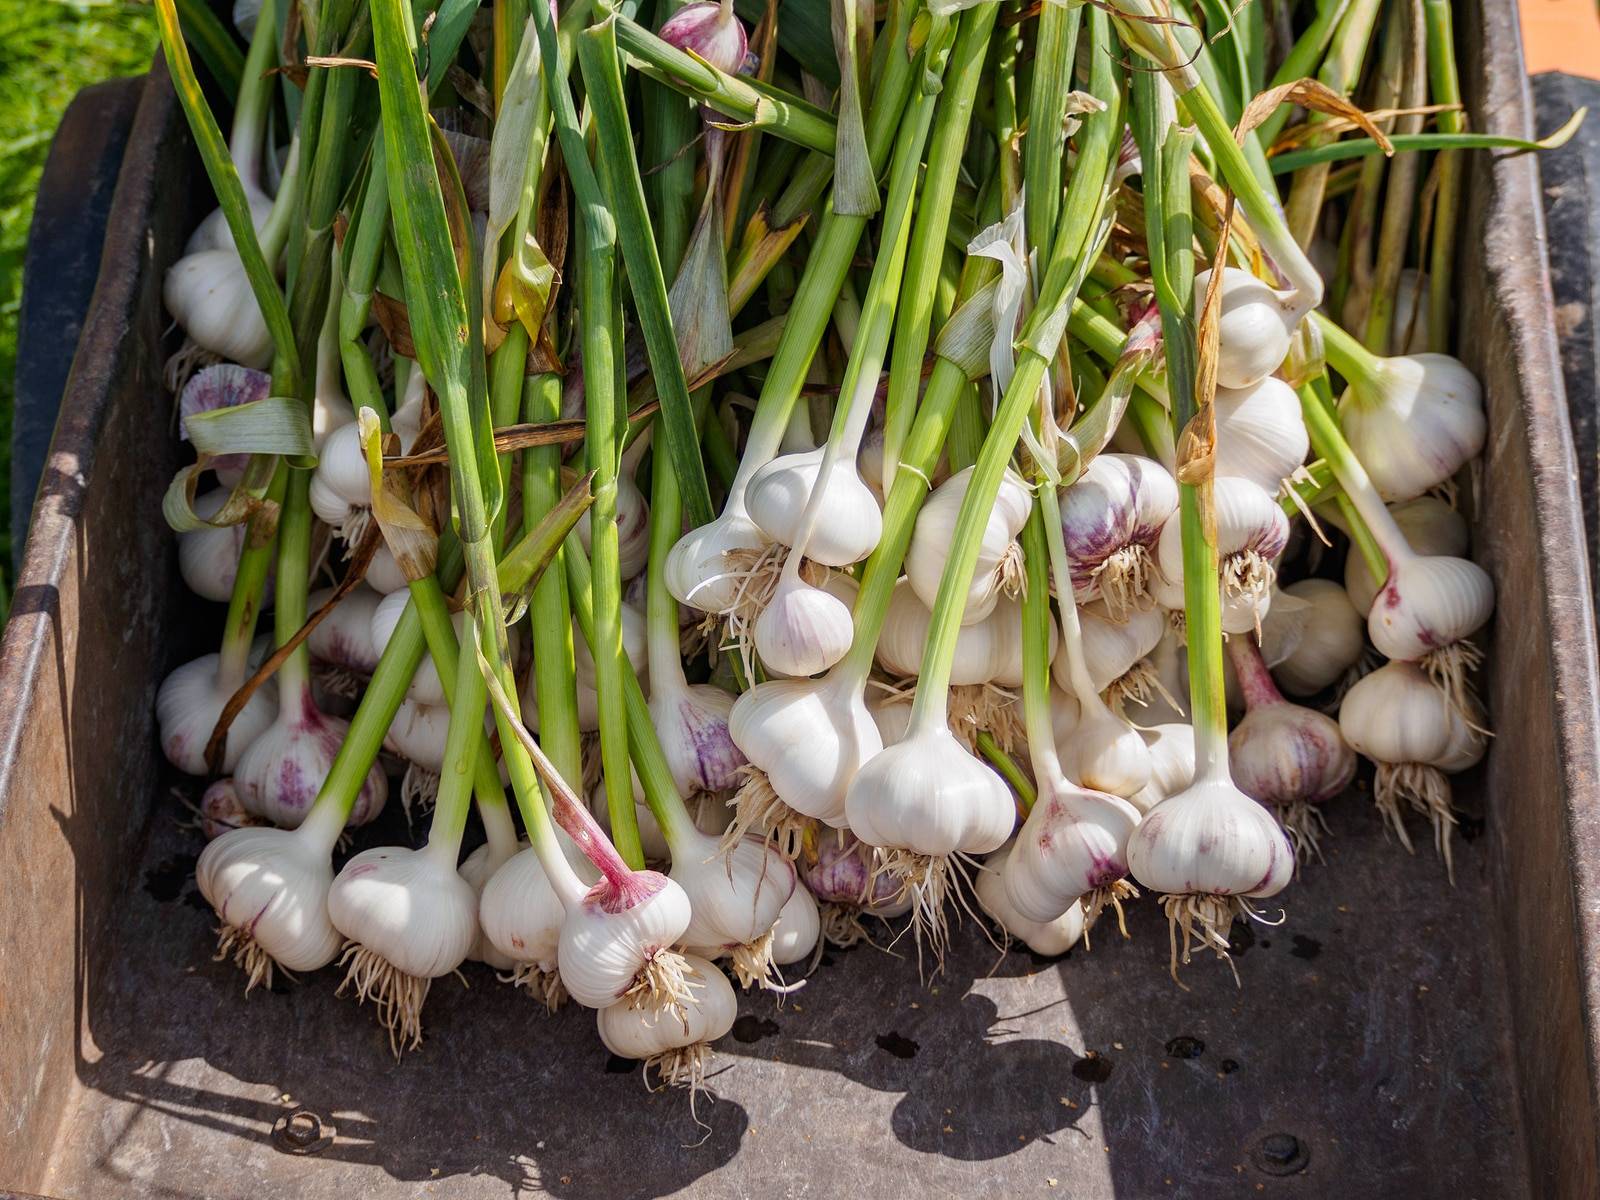 Did you know the Harsh and Toxic Truths About Garlic?